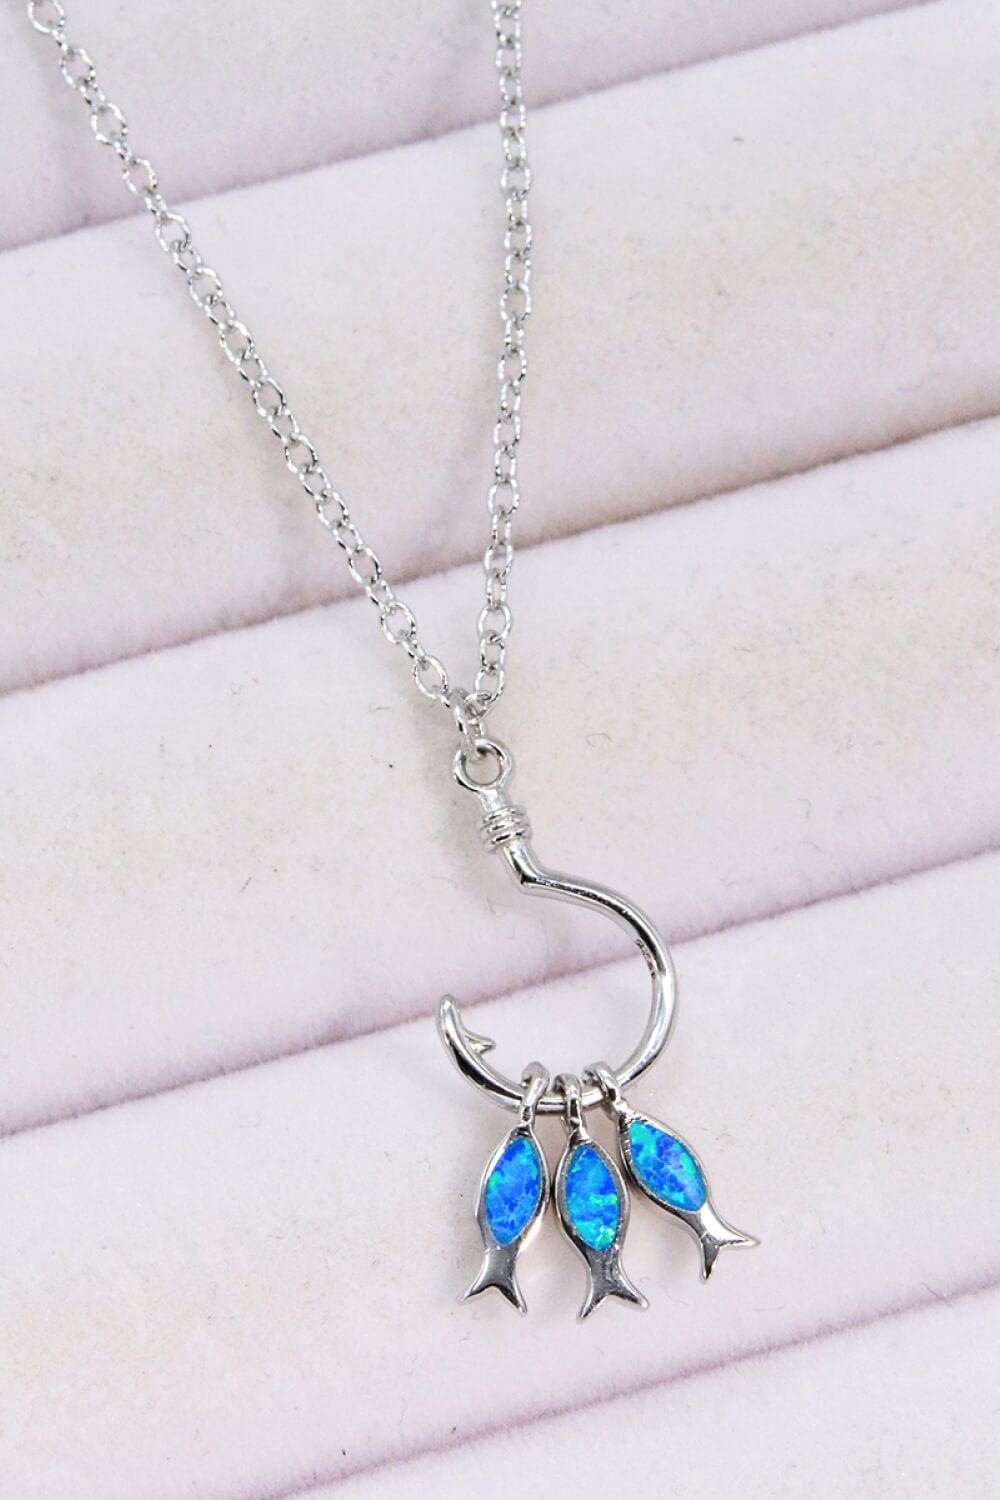 Opal Fish 925 Sterling Silver Necklace - Shah S. Sahota